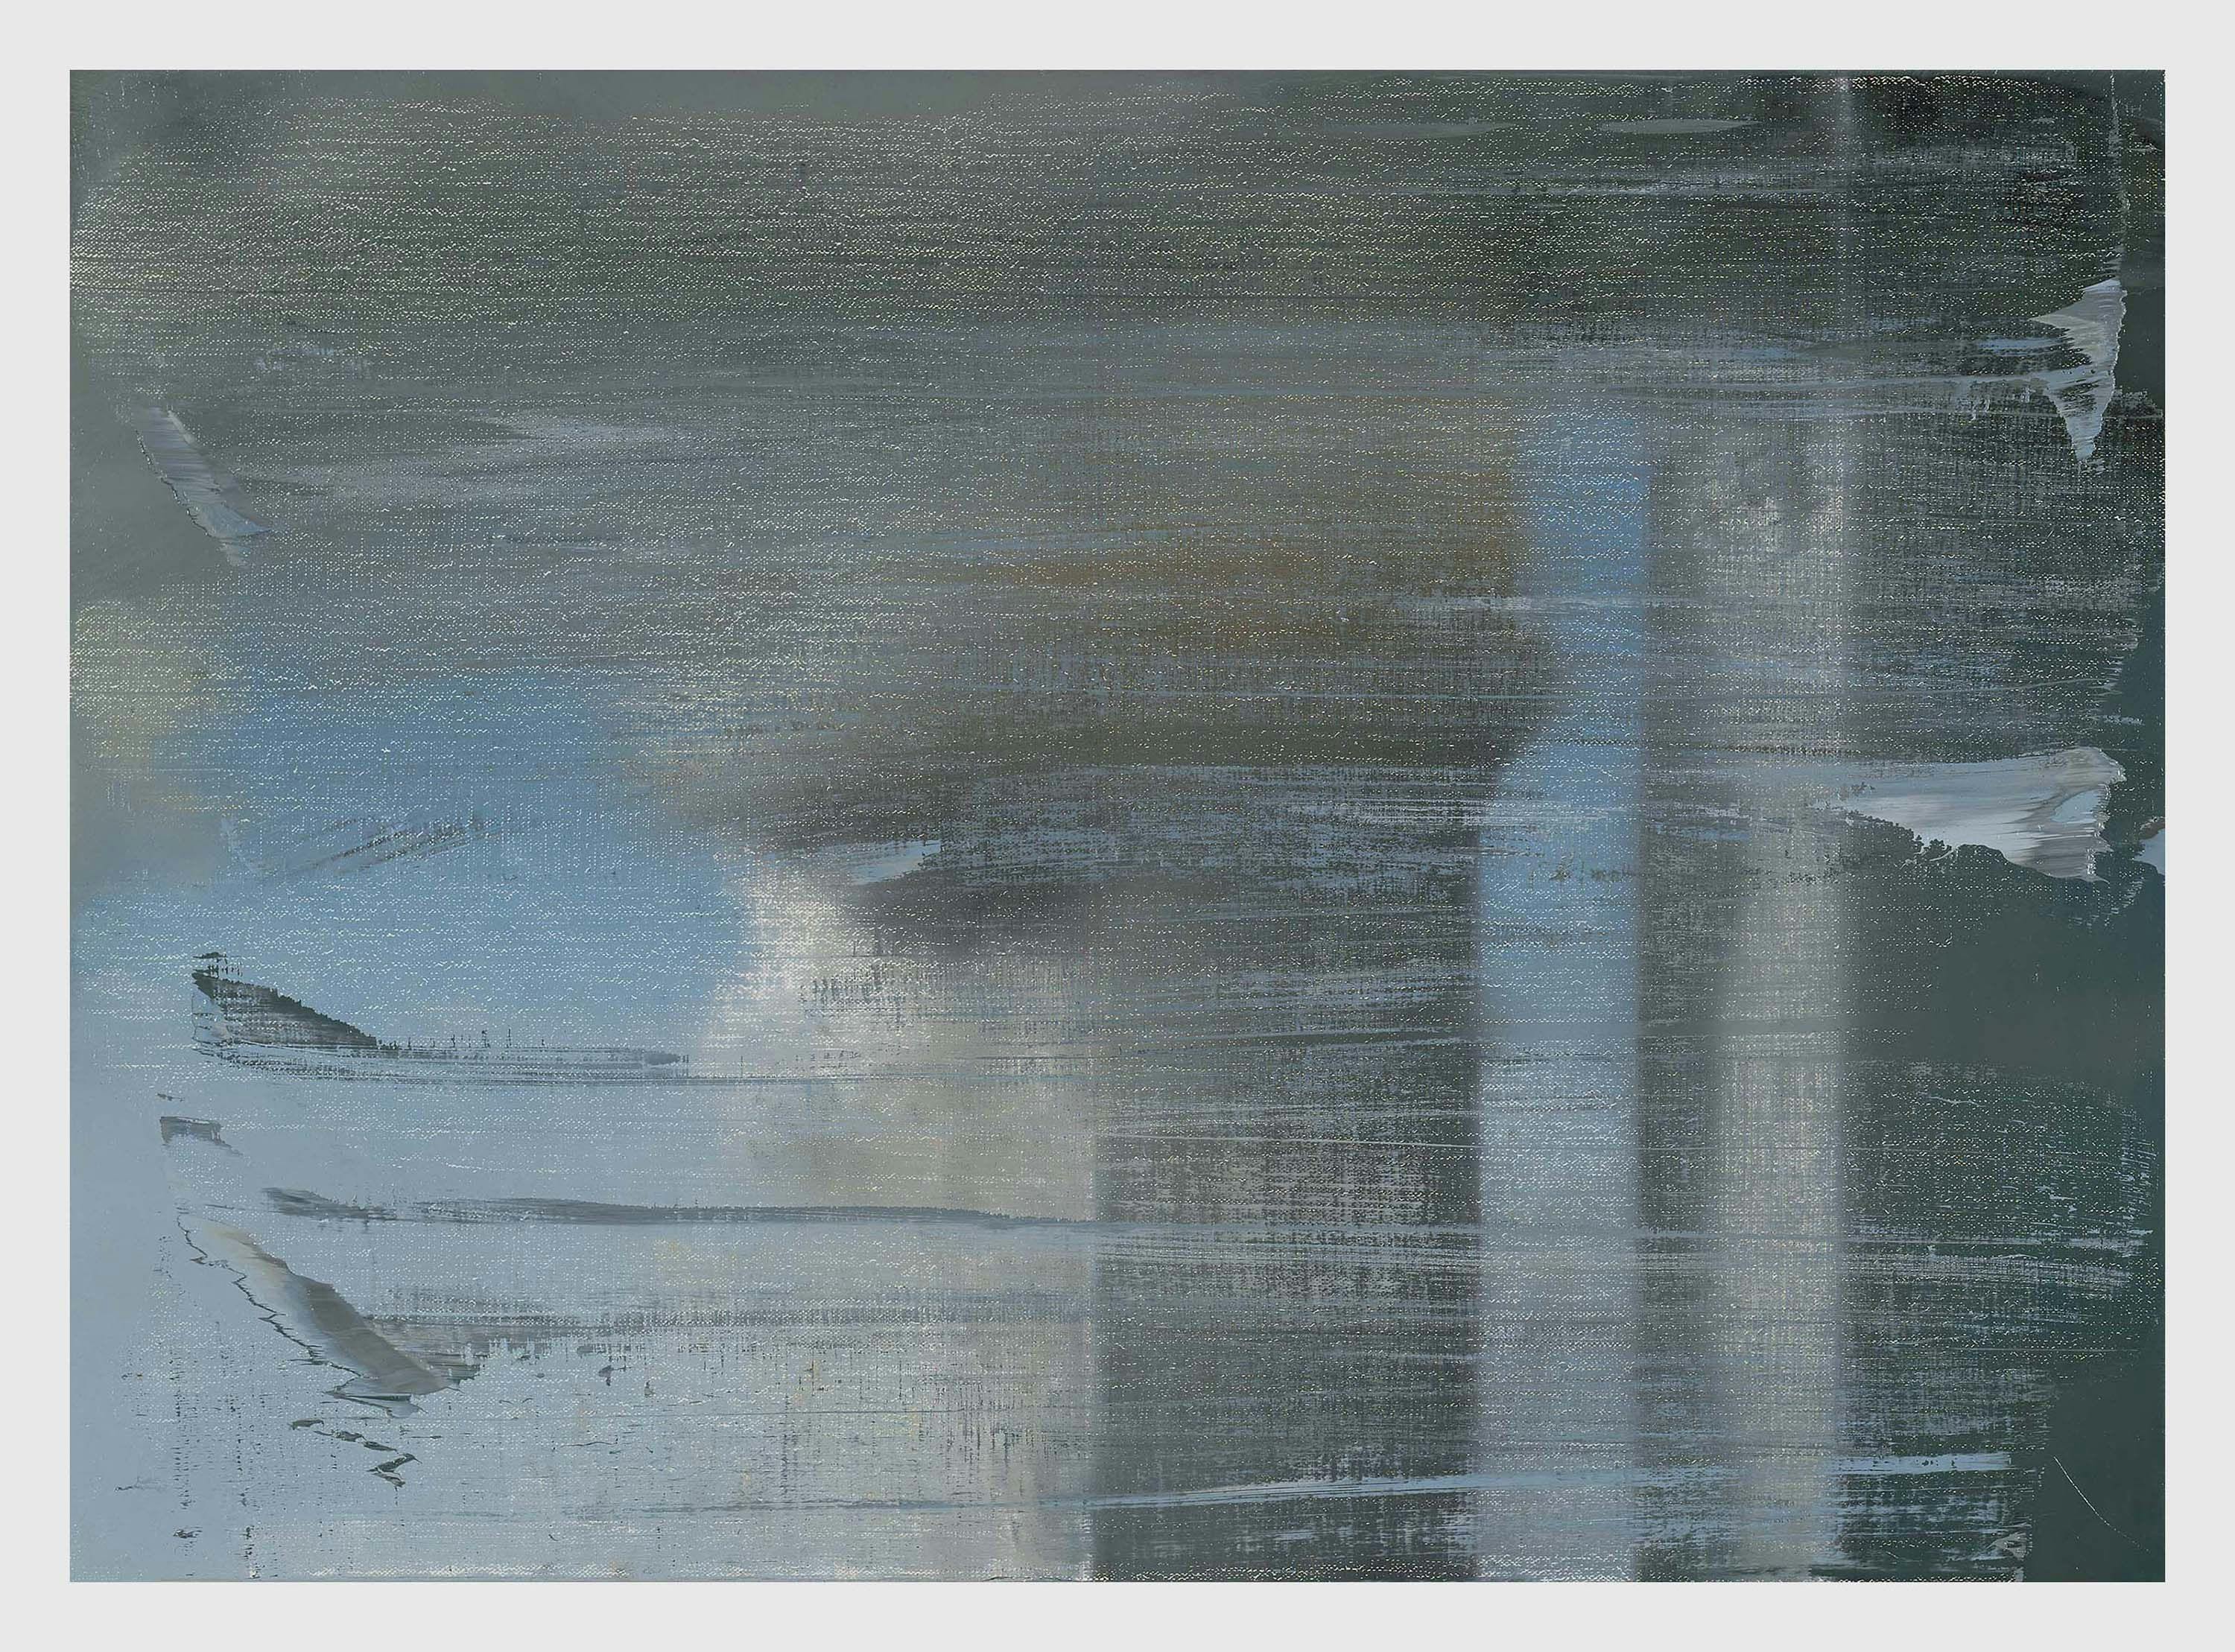 A painting by Gerhard Richter, titled September, dated 2005.